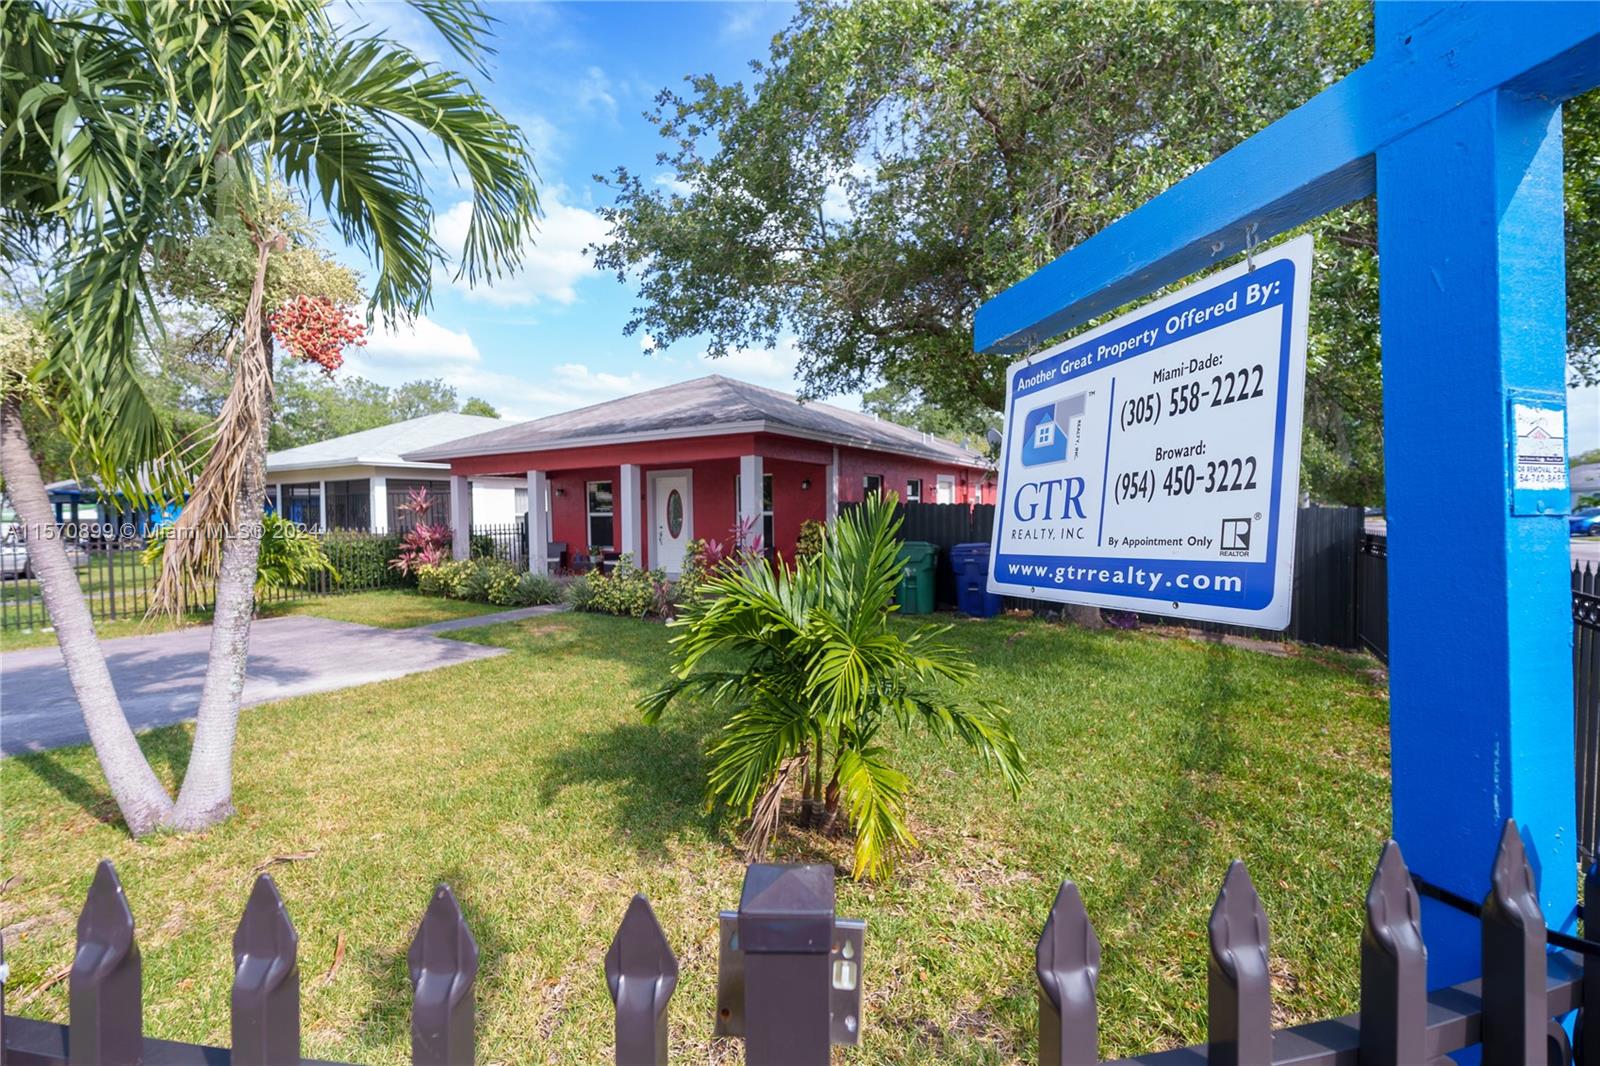 Two small dogs on the premises. Nice Corner starter home centrally located in Miami. Property is completely fence for privacy and a front electric gate for ease of getting in and out of your driveway. Property has impact windows and doors. Central AC unit replaced in 2023. Impact windows installed in 2019, shingle roof replaced 10 years ago. Aluminum fence installed in 2023. This property should pass wind mitigation and four point inspection without a problem. Huge corner lot, room for a pool, a possible in-law  quarters, or a two-car garage. Should check with the city of Miami zoning and building department. Remarks here are as per the owner's information. Please do your due diligence. Must provide a DU or LP and proof of funds with all offers. No exceptions.